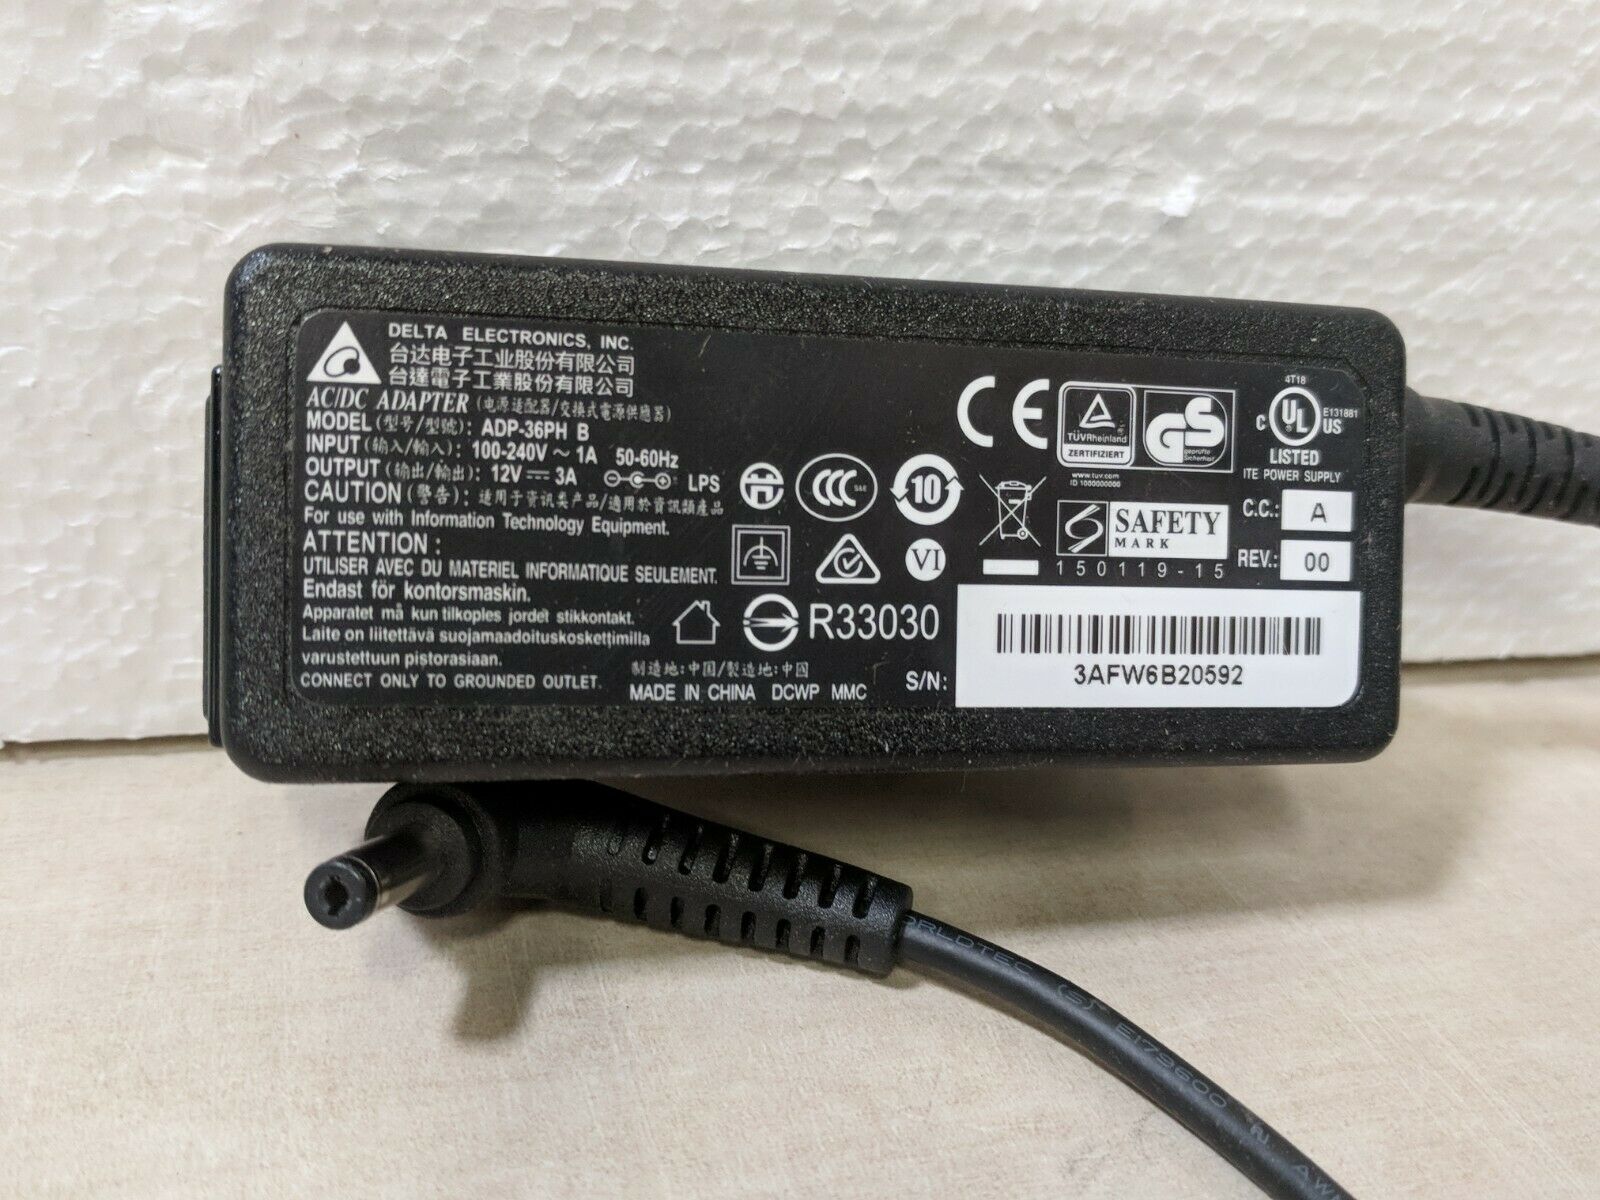 NEW Delta ADP-36PH B AC ADAPTER POWER SUPPLY CHARGER 12V 3A